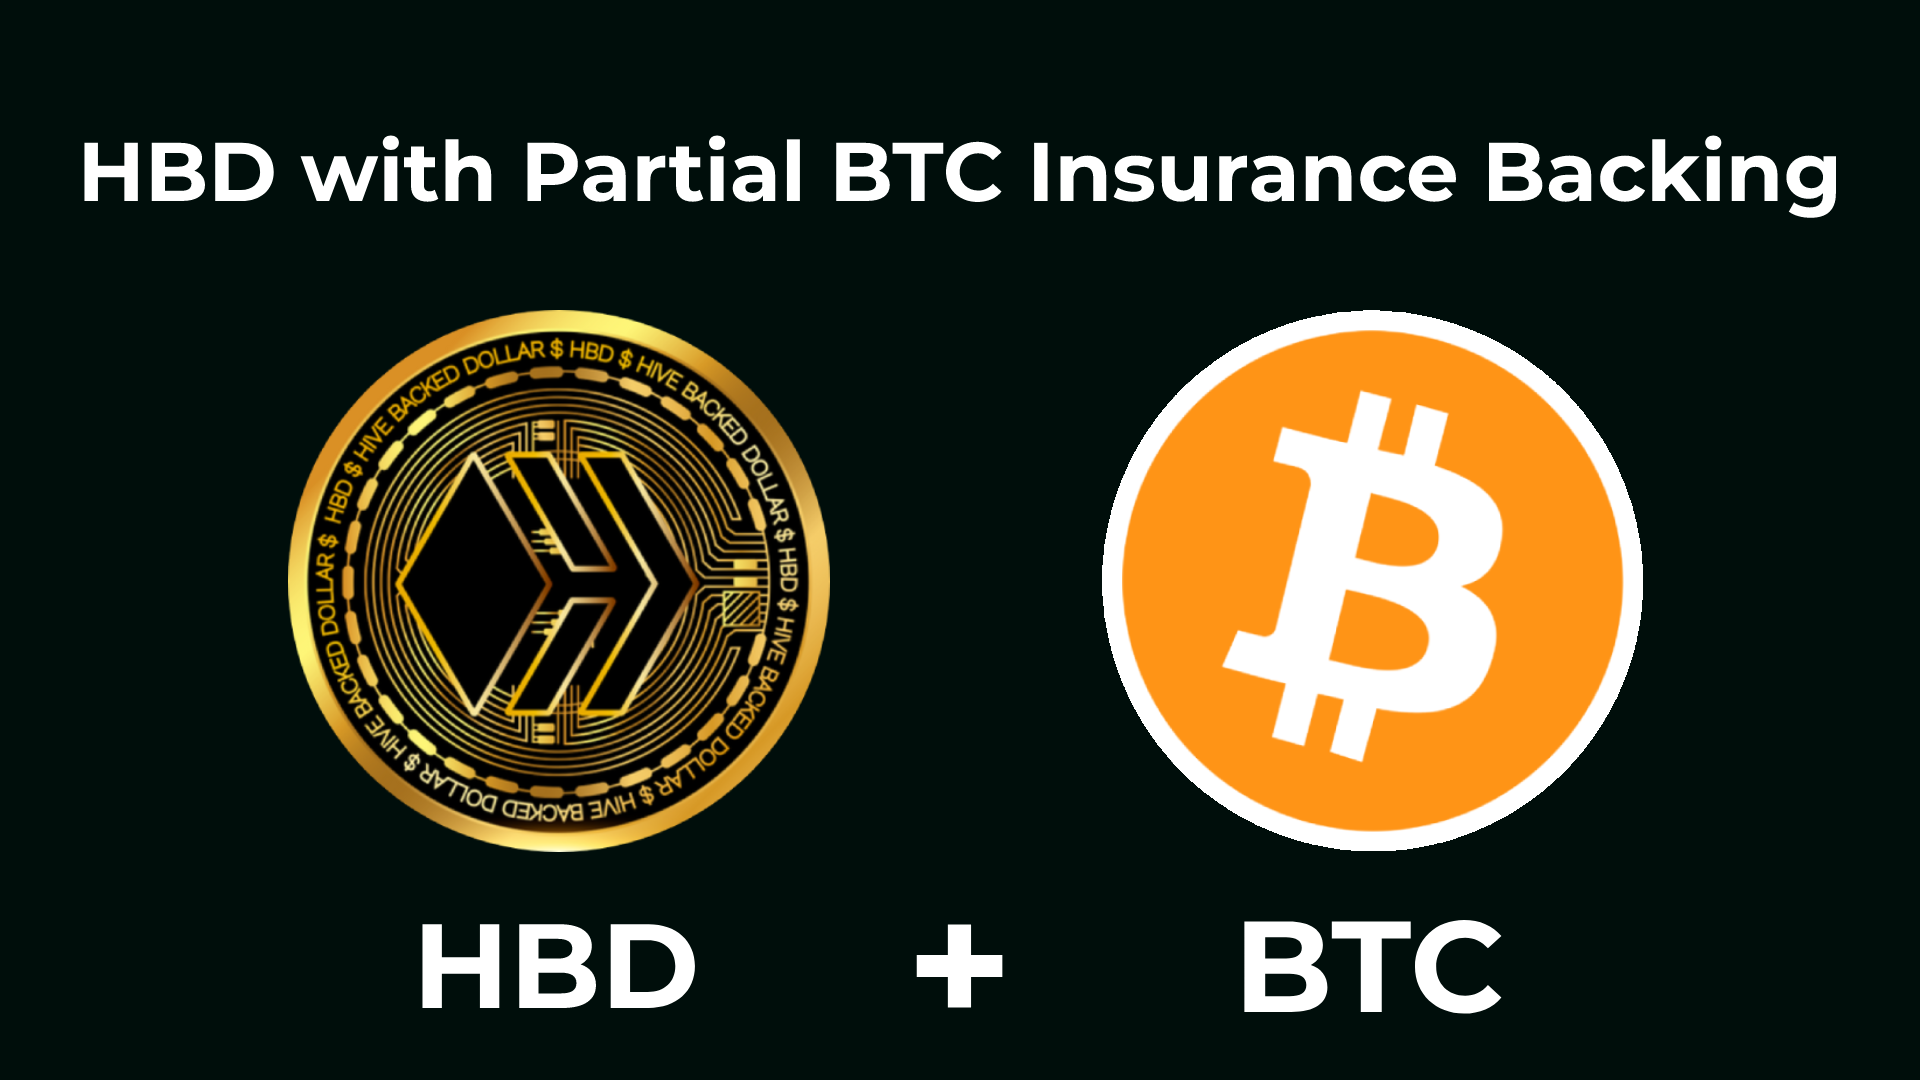 @threespeak/hbd-partial-insurance-with-btc-proposal-to-print-1m-usd-of-hive